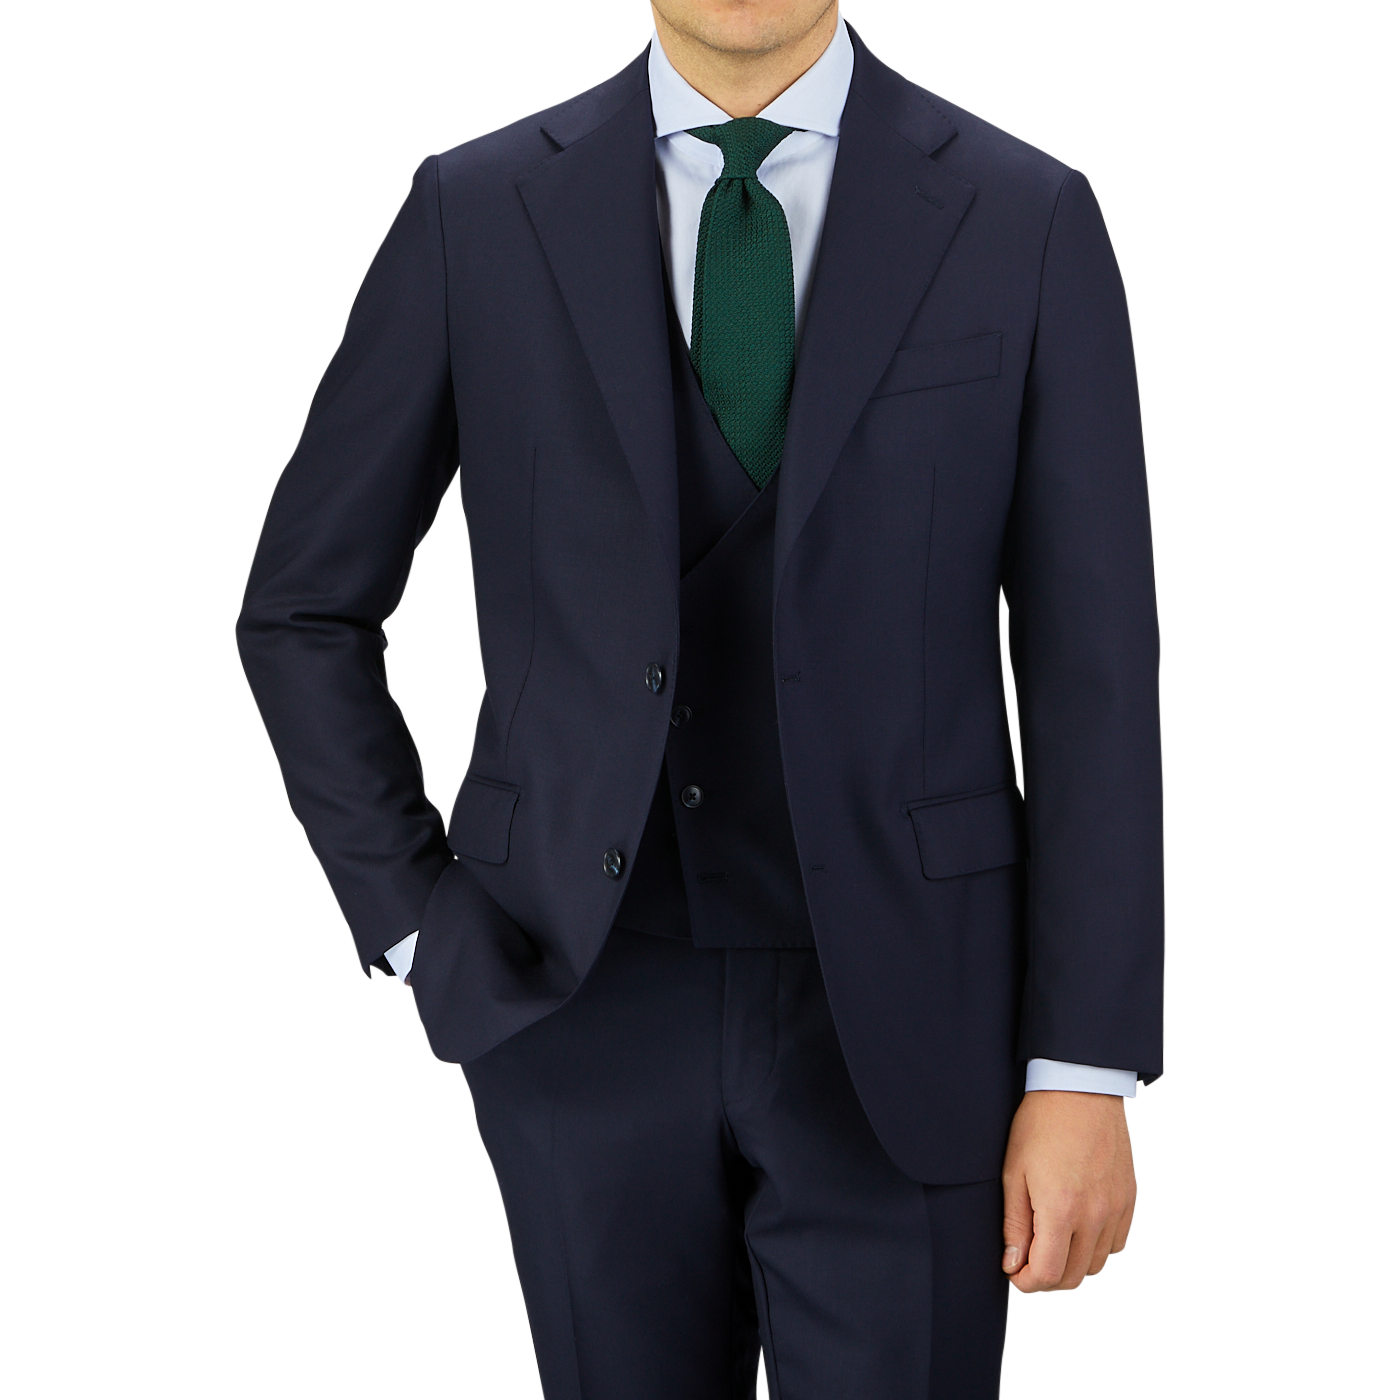 A professional man in a Baltzar Sartorial navy blue Super 100s wool three-piece suit with a white shirt, green tie, and no visible head.